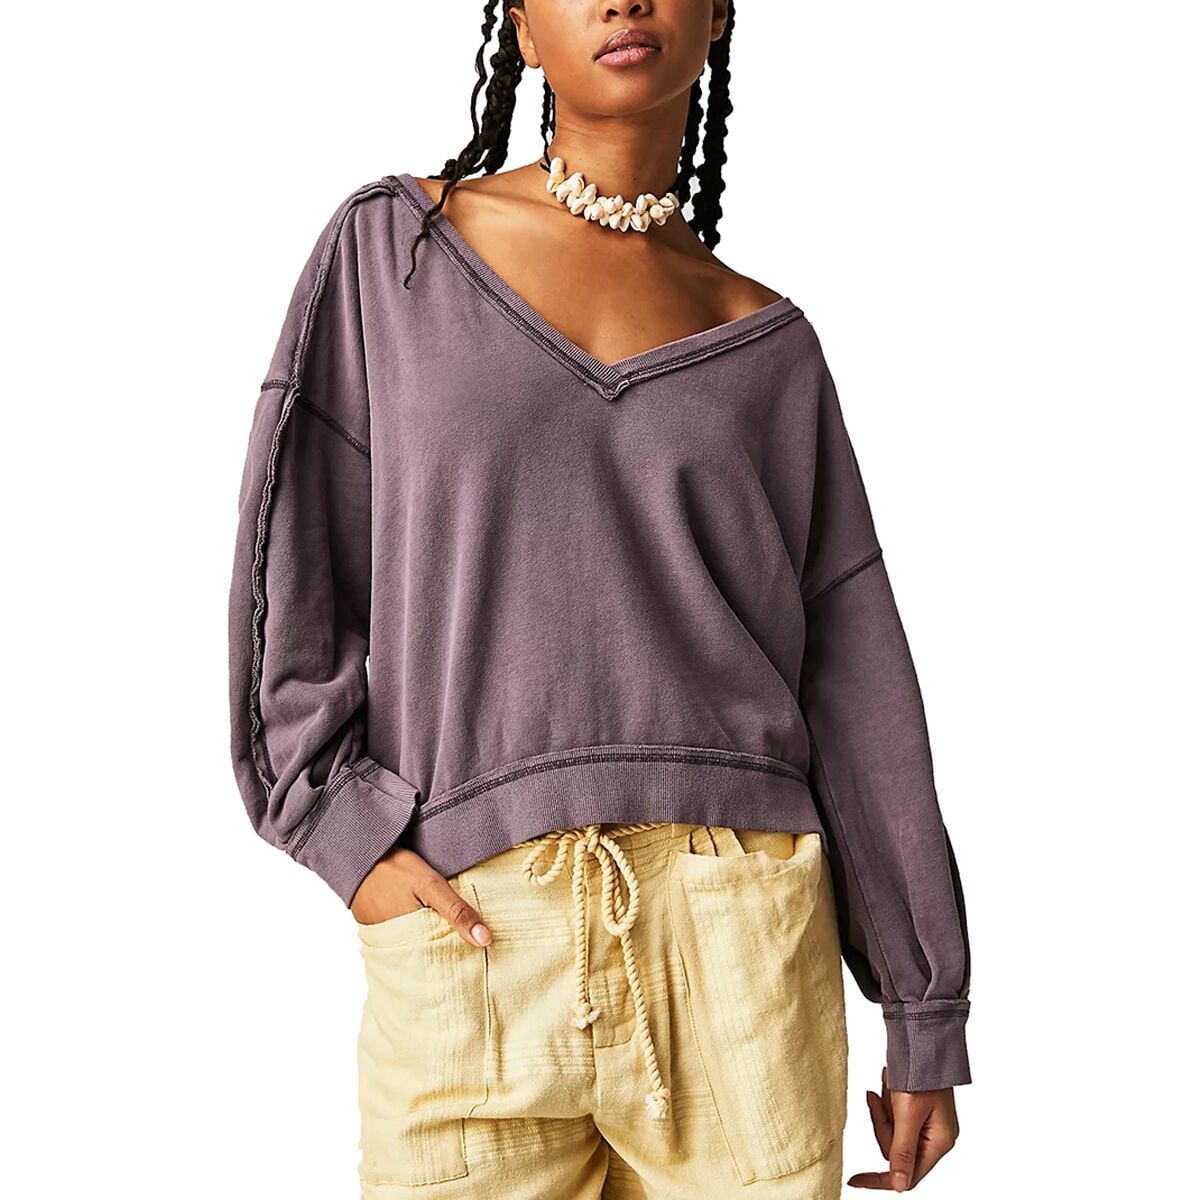 Free People Take One Pullover - Women's